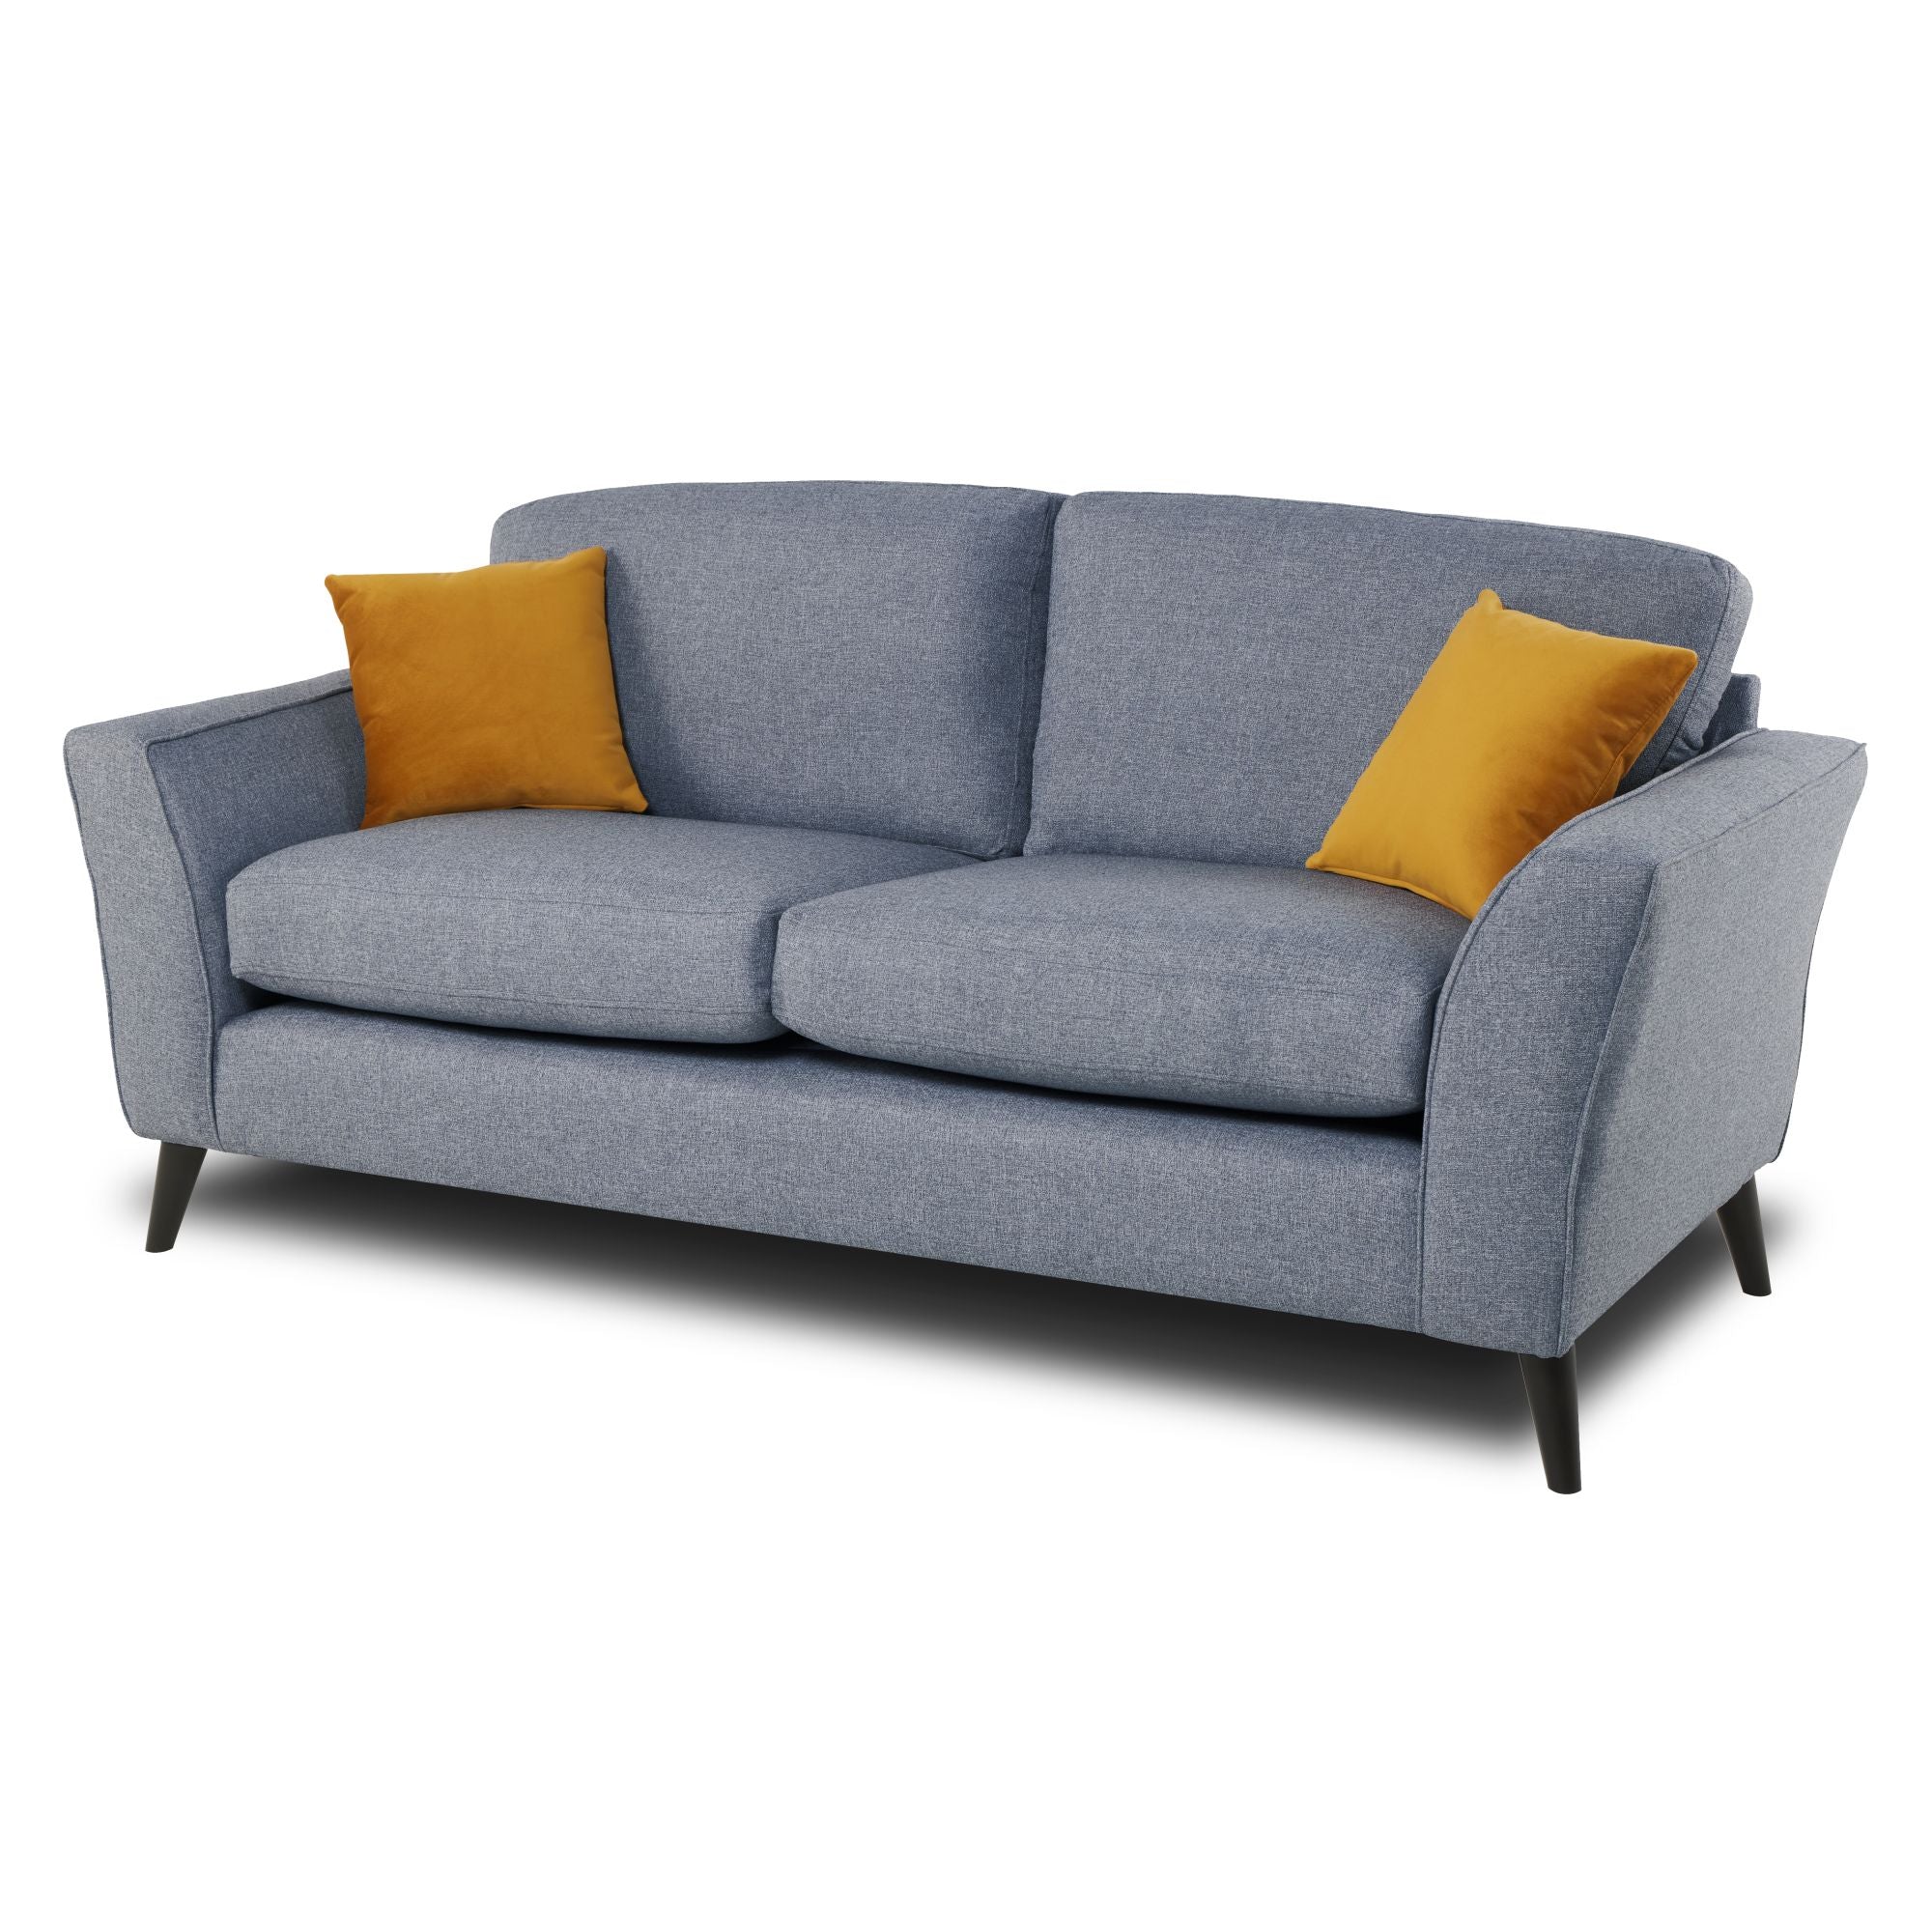 Libby 3 seater sofa in denim on an angle with white background 